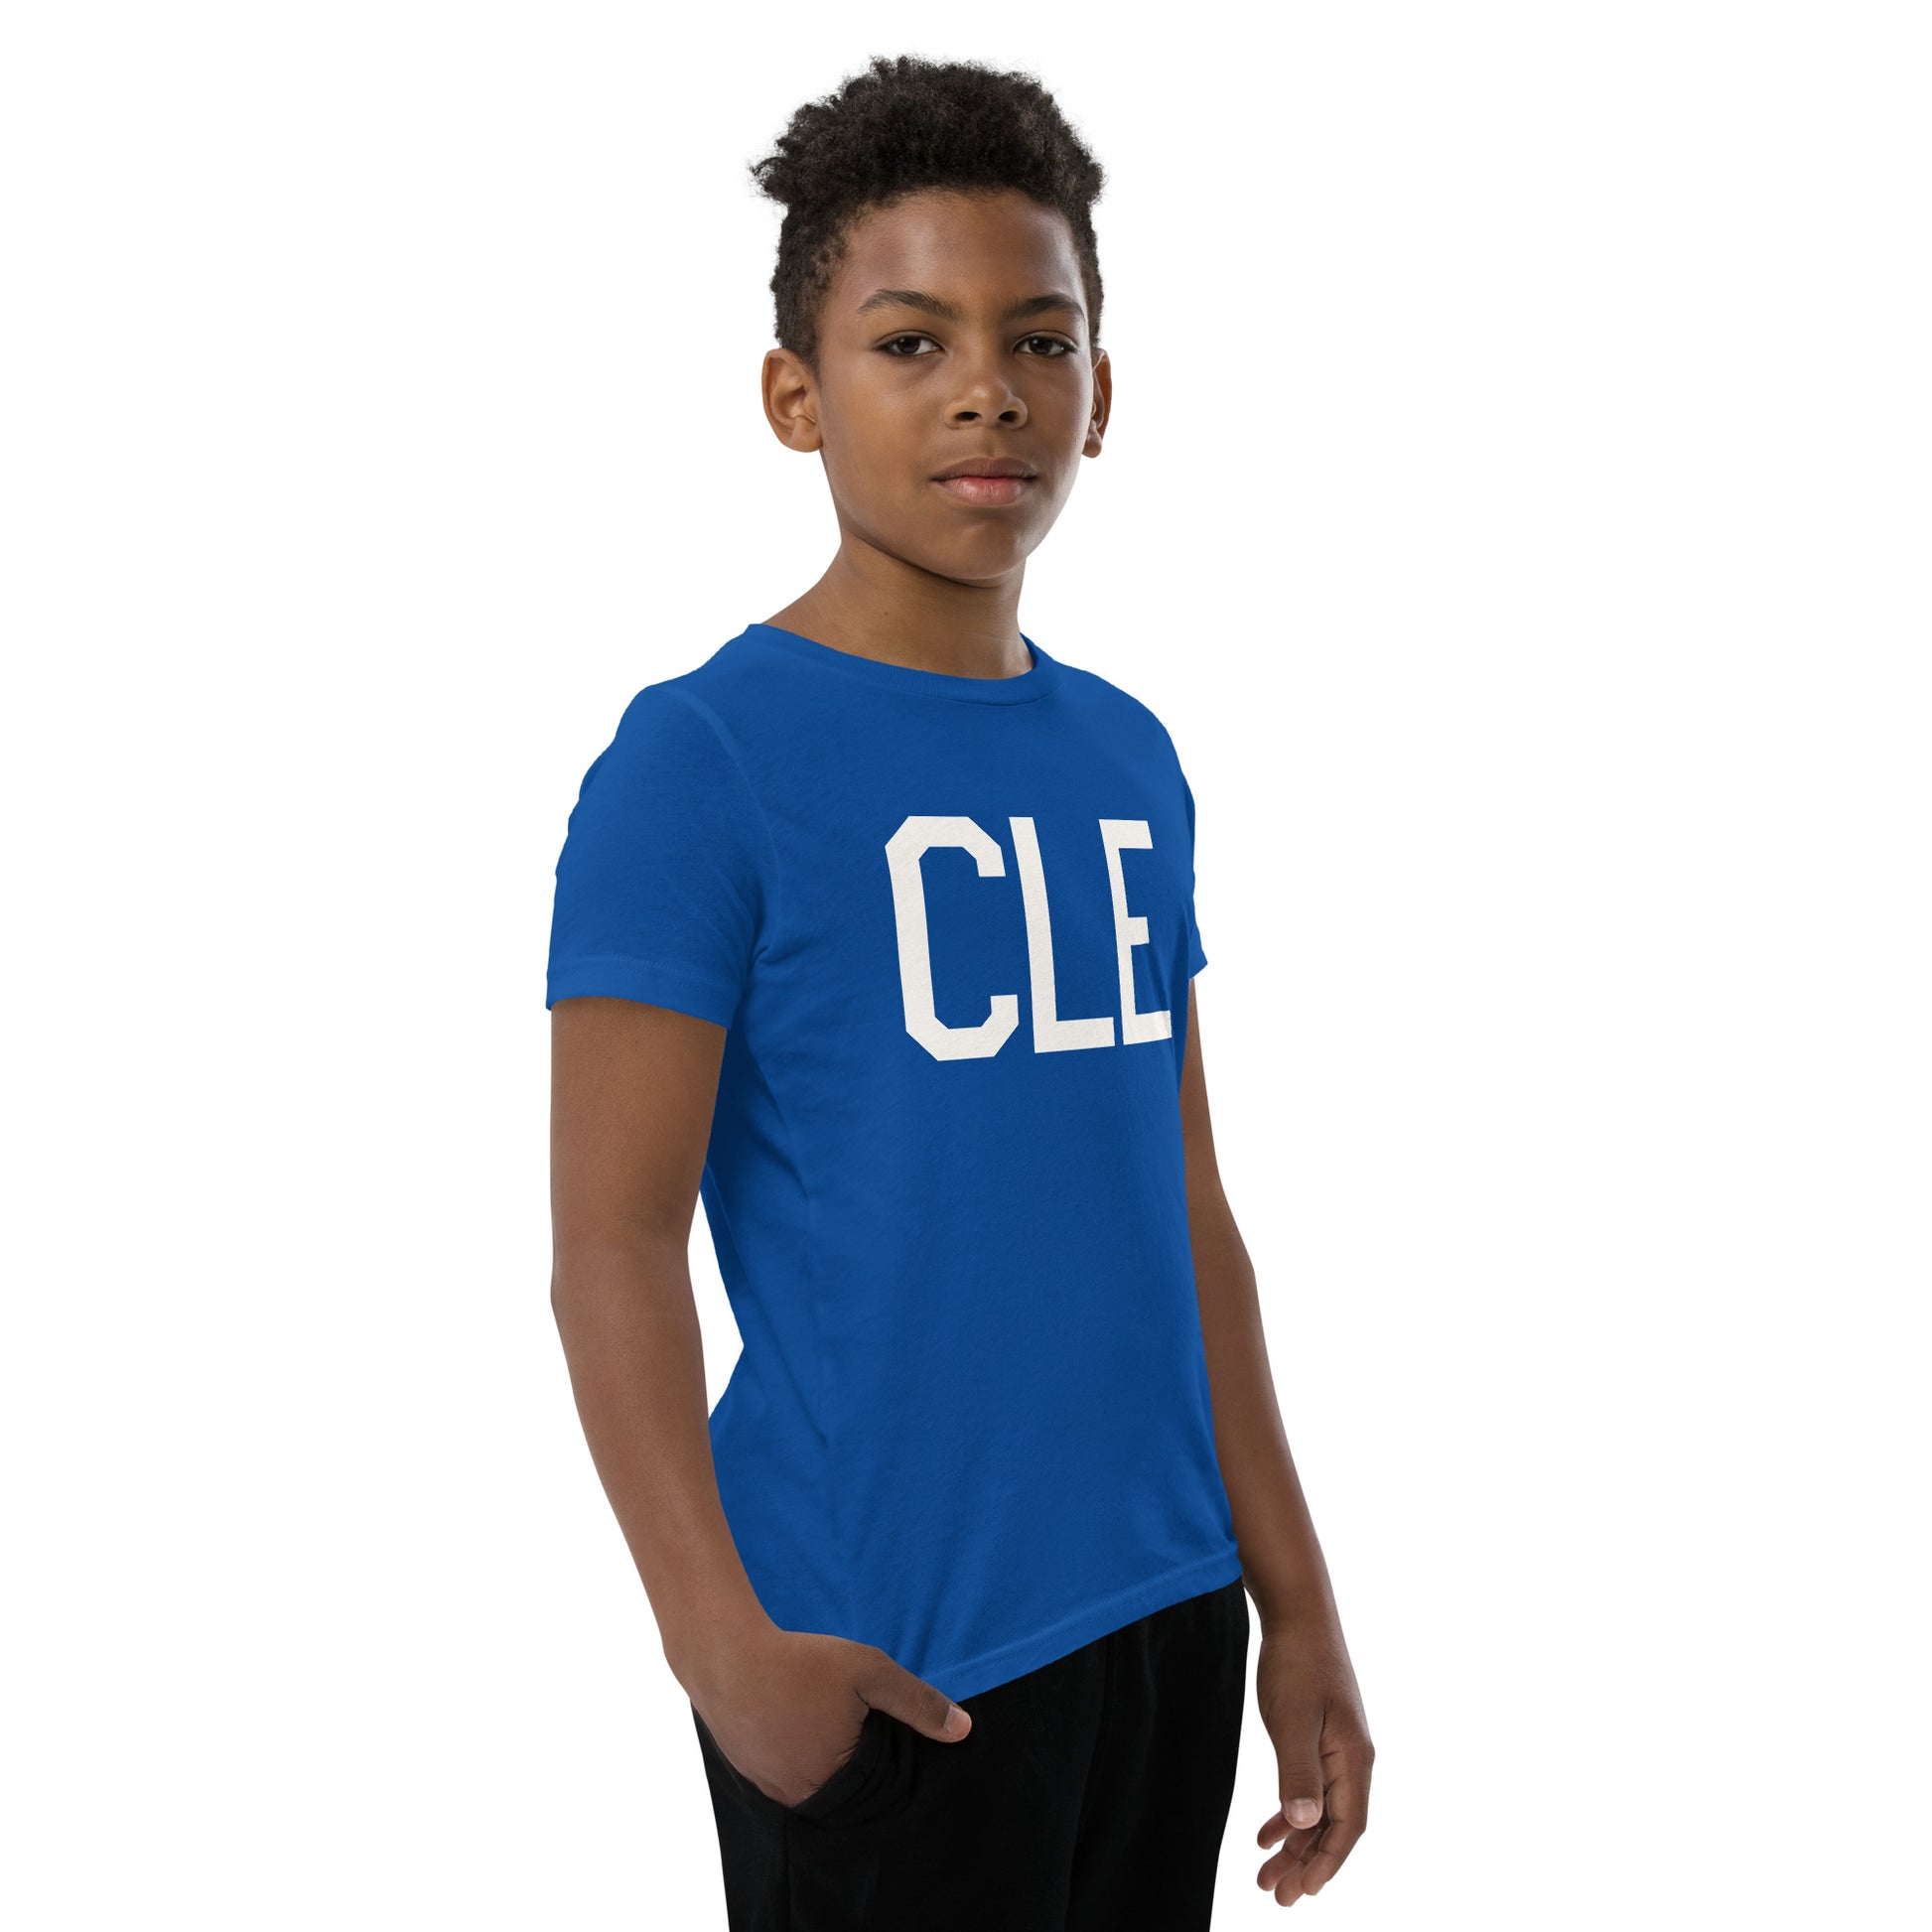 Kid's T-Shirt - White Graphic • CLE Cleveland • YHM Designs - Image 12